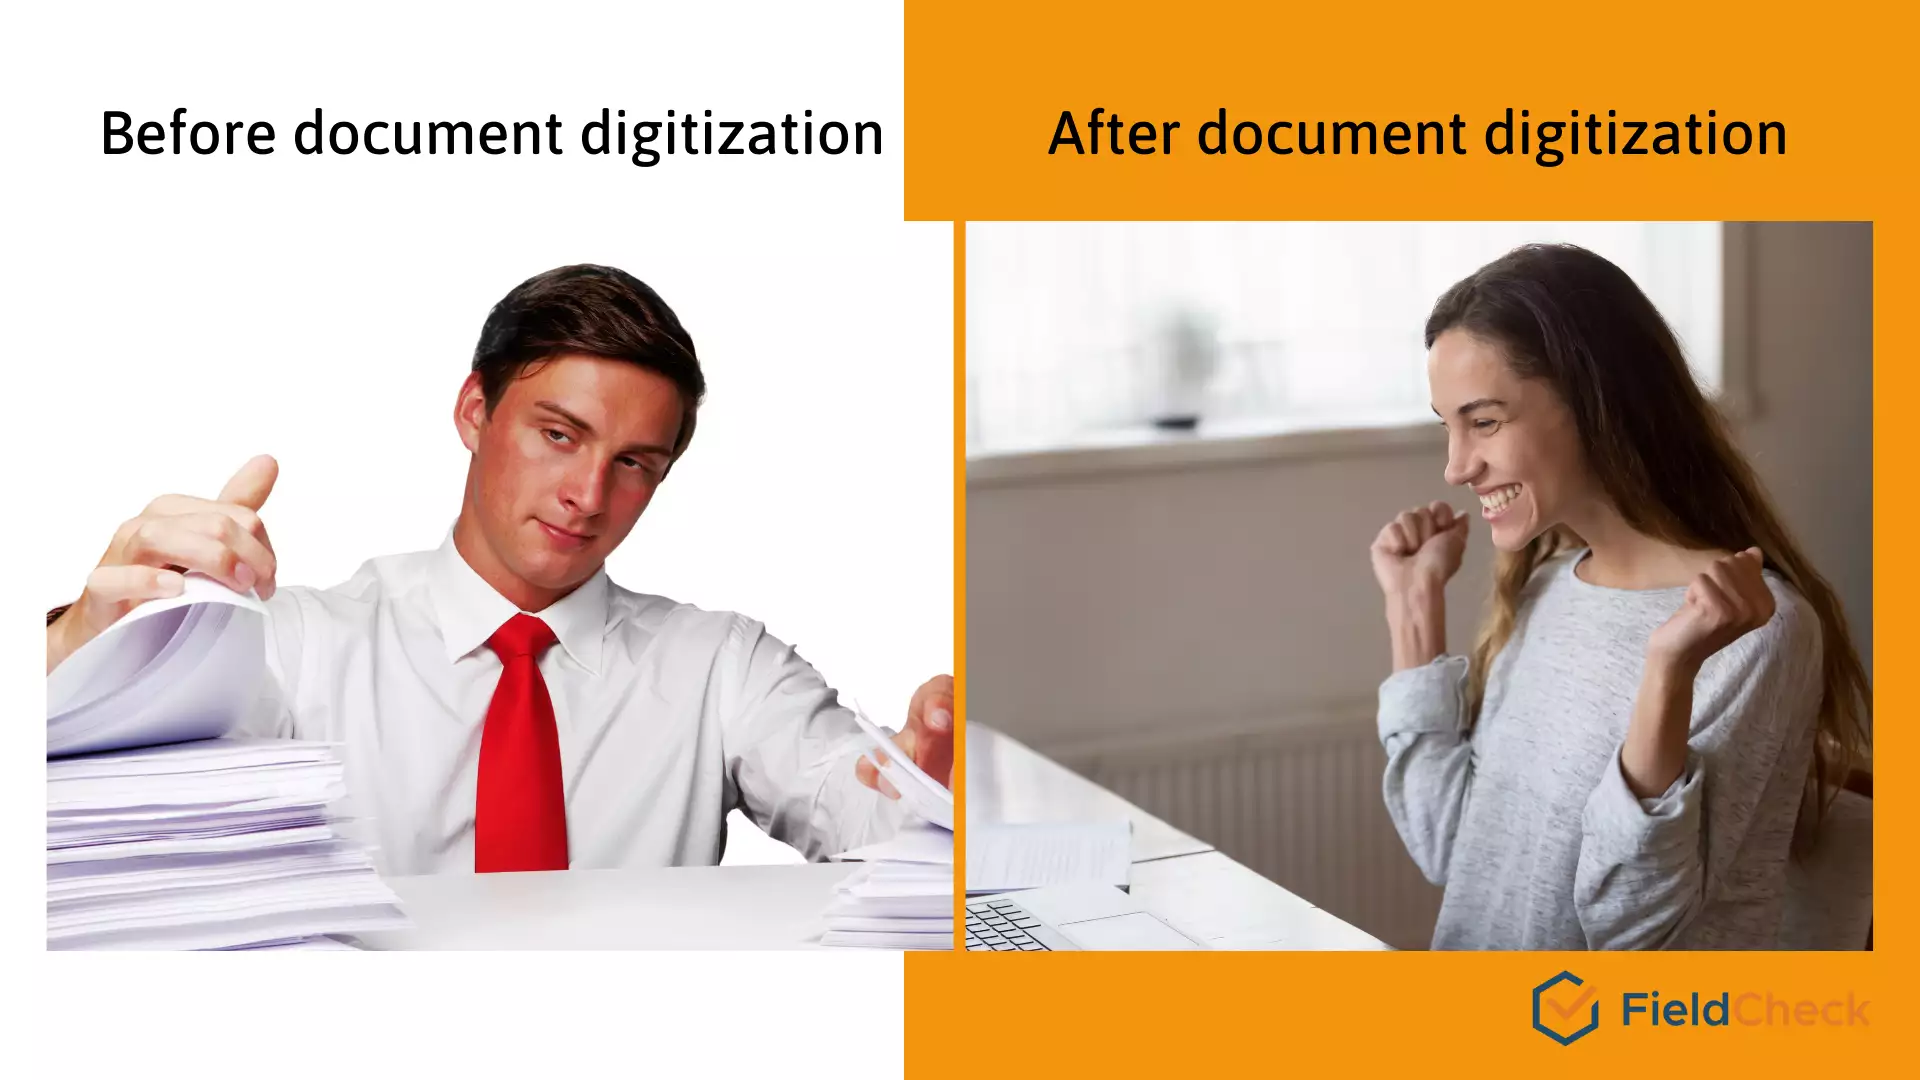 Document Digitization Process - The Best Solution, Data Security 2022